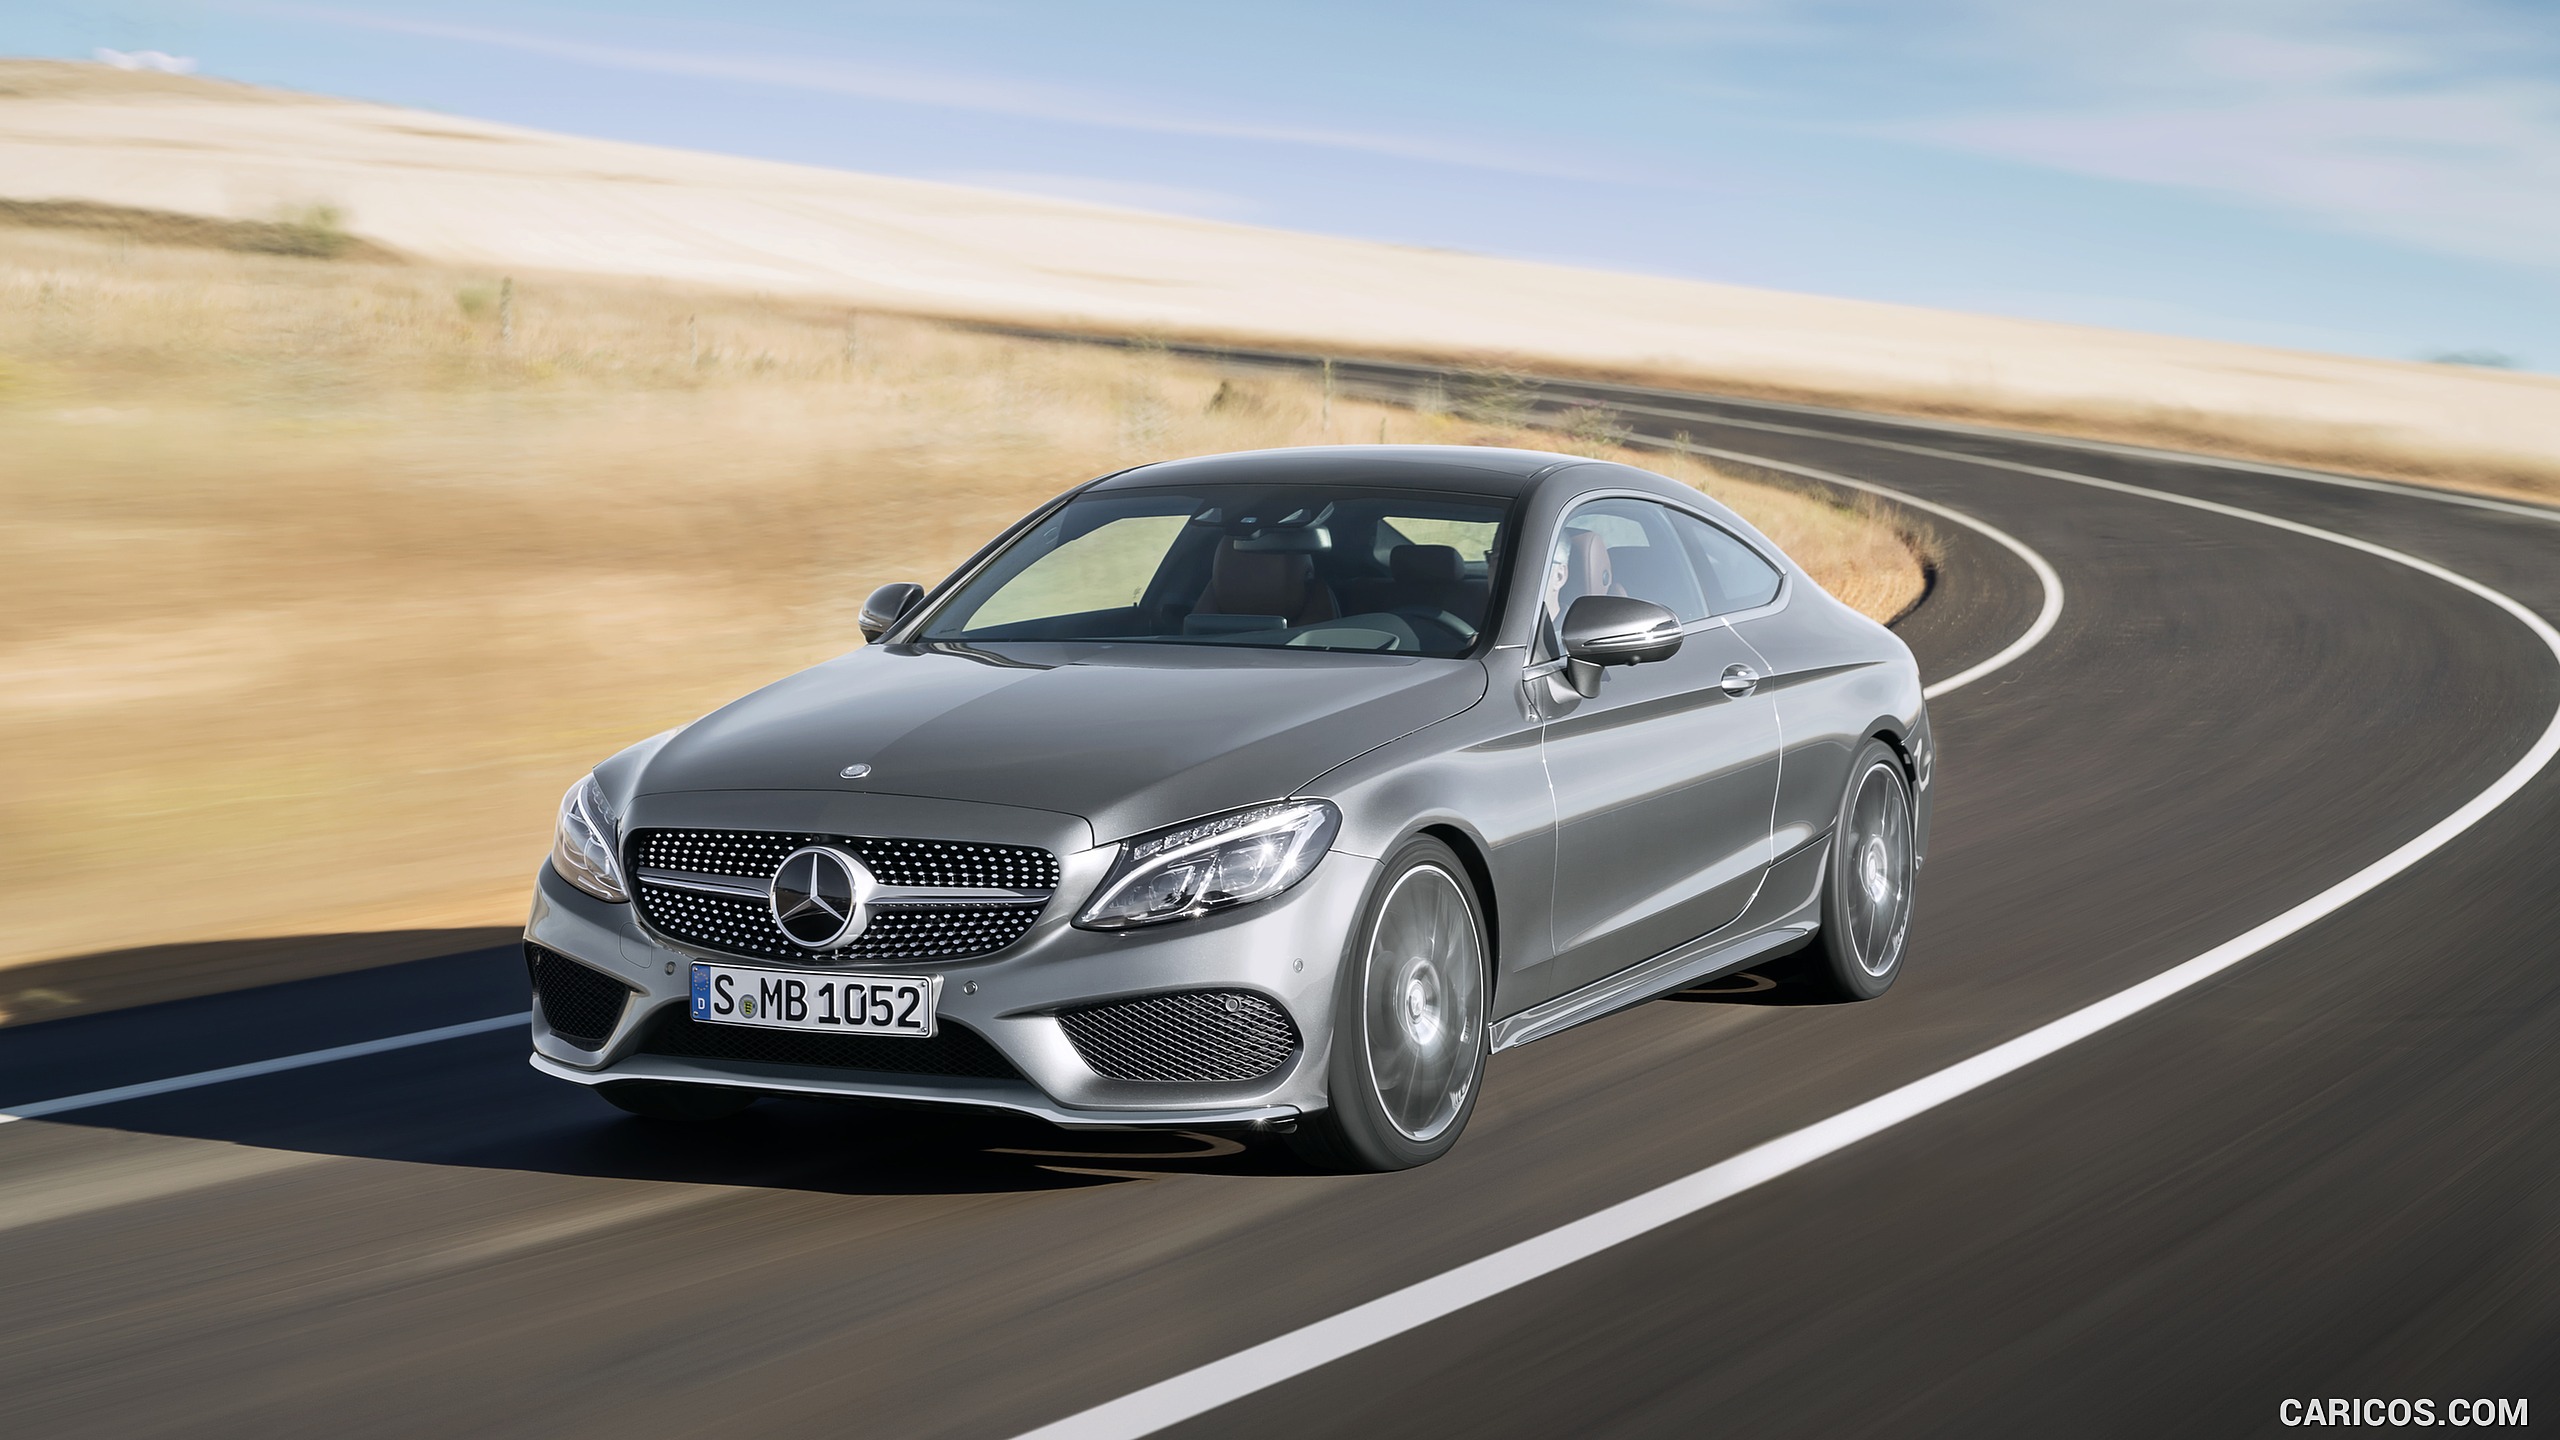 2017 Mercedes-Benz C-Class Coupe C300 (Selenit Grey) - , #4 of 210